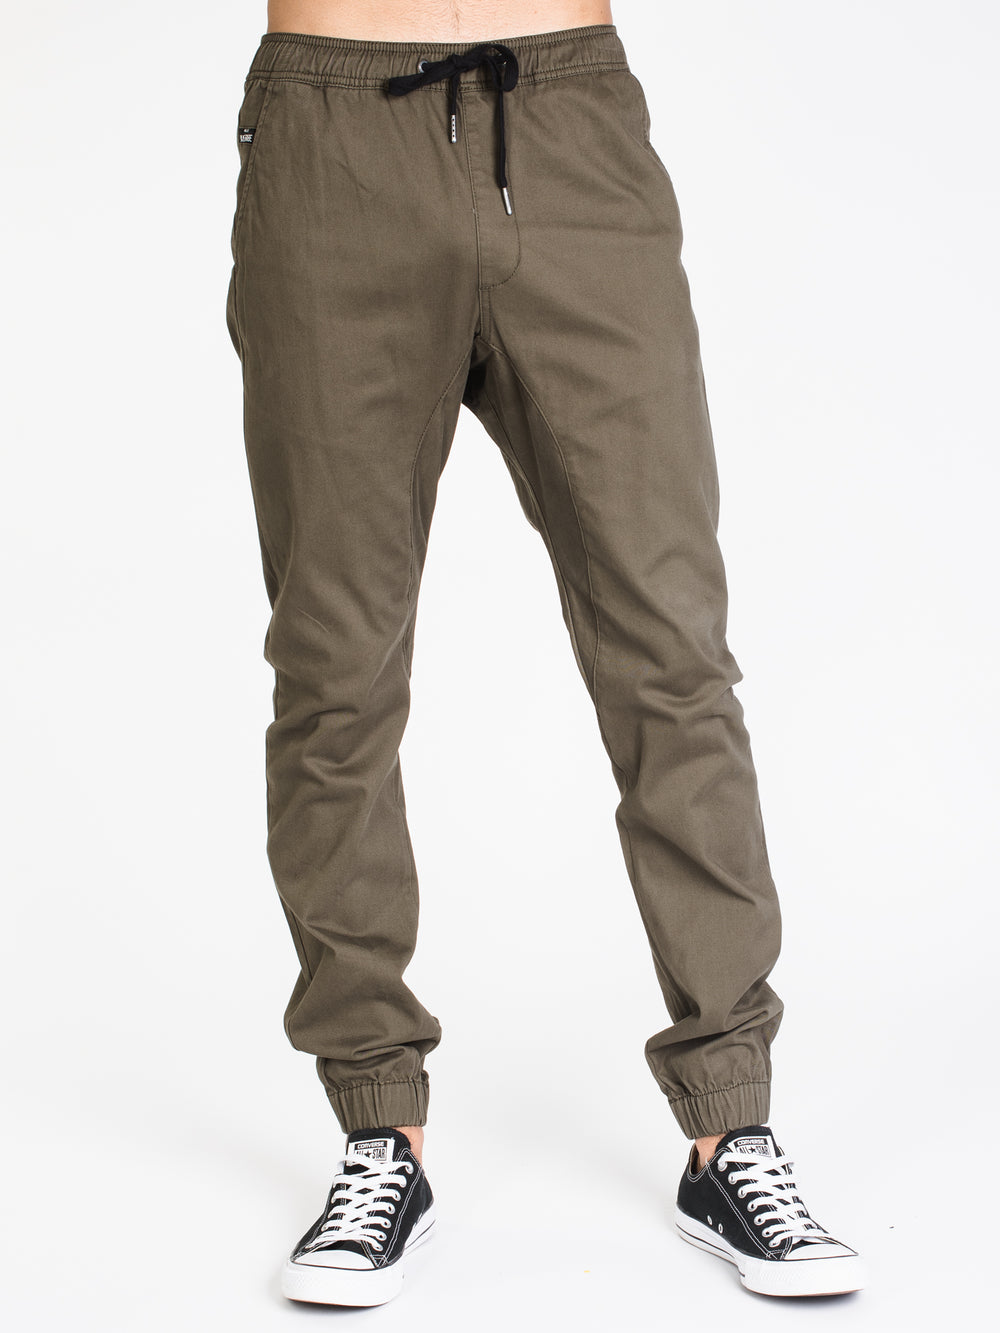 MENS PROJECT ZANEROBE JOGGER - OLIVE - CLEARANCE